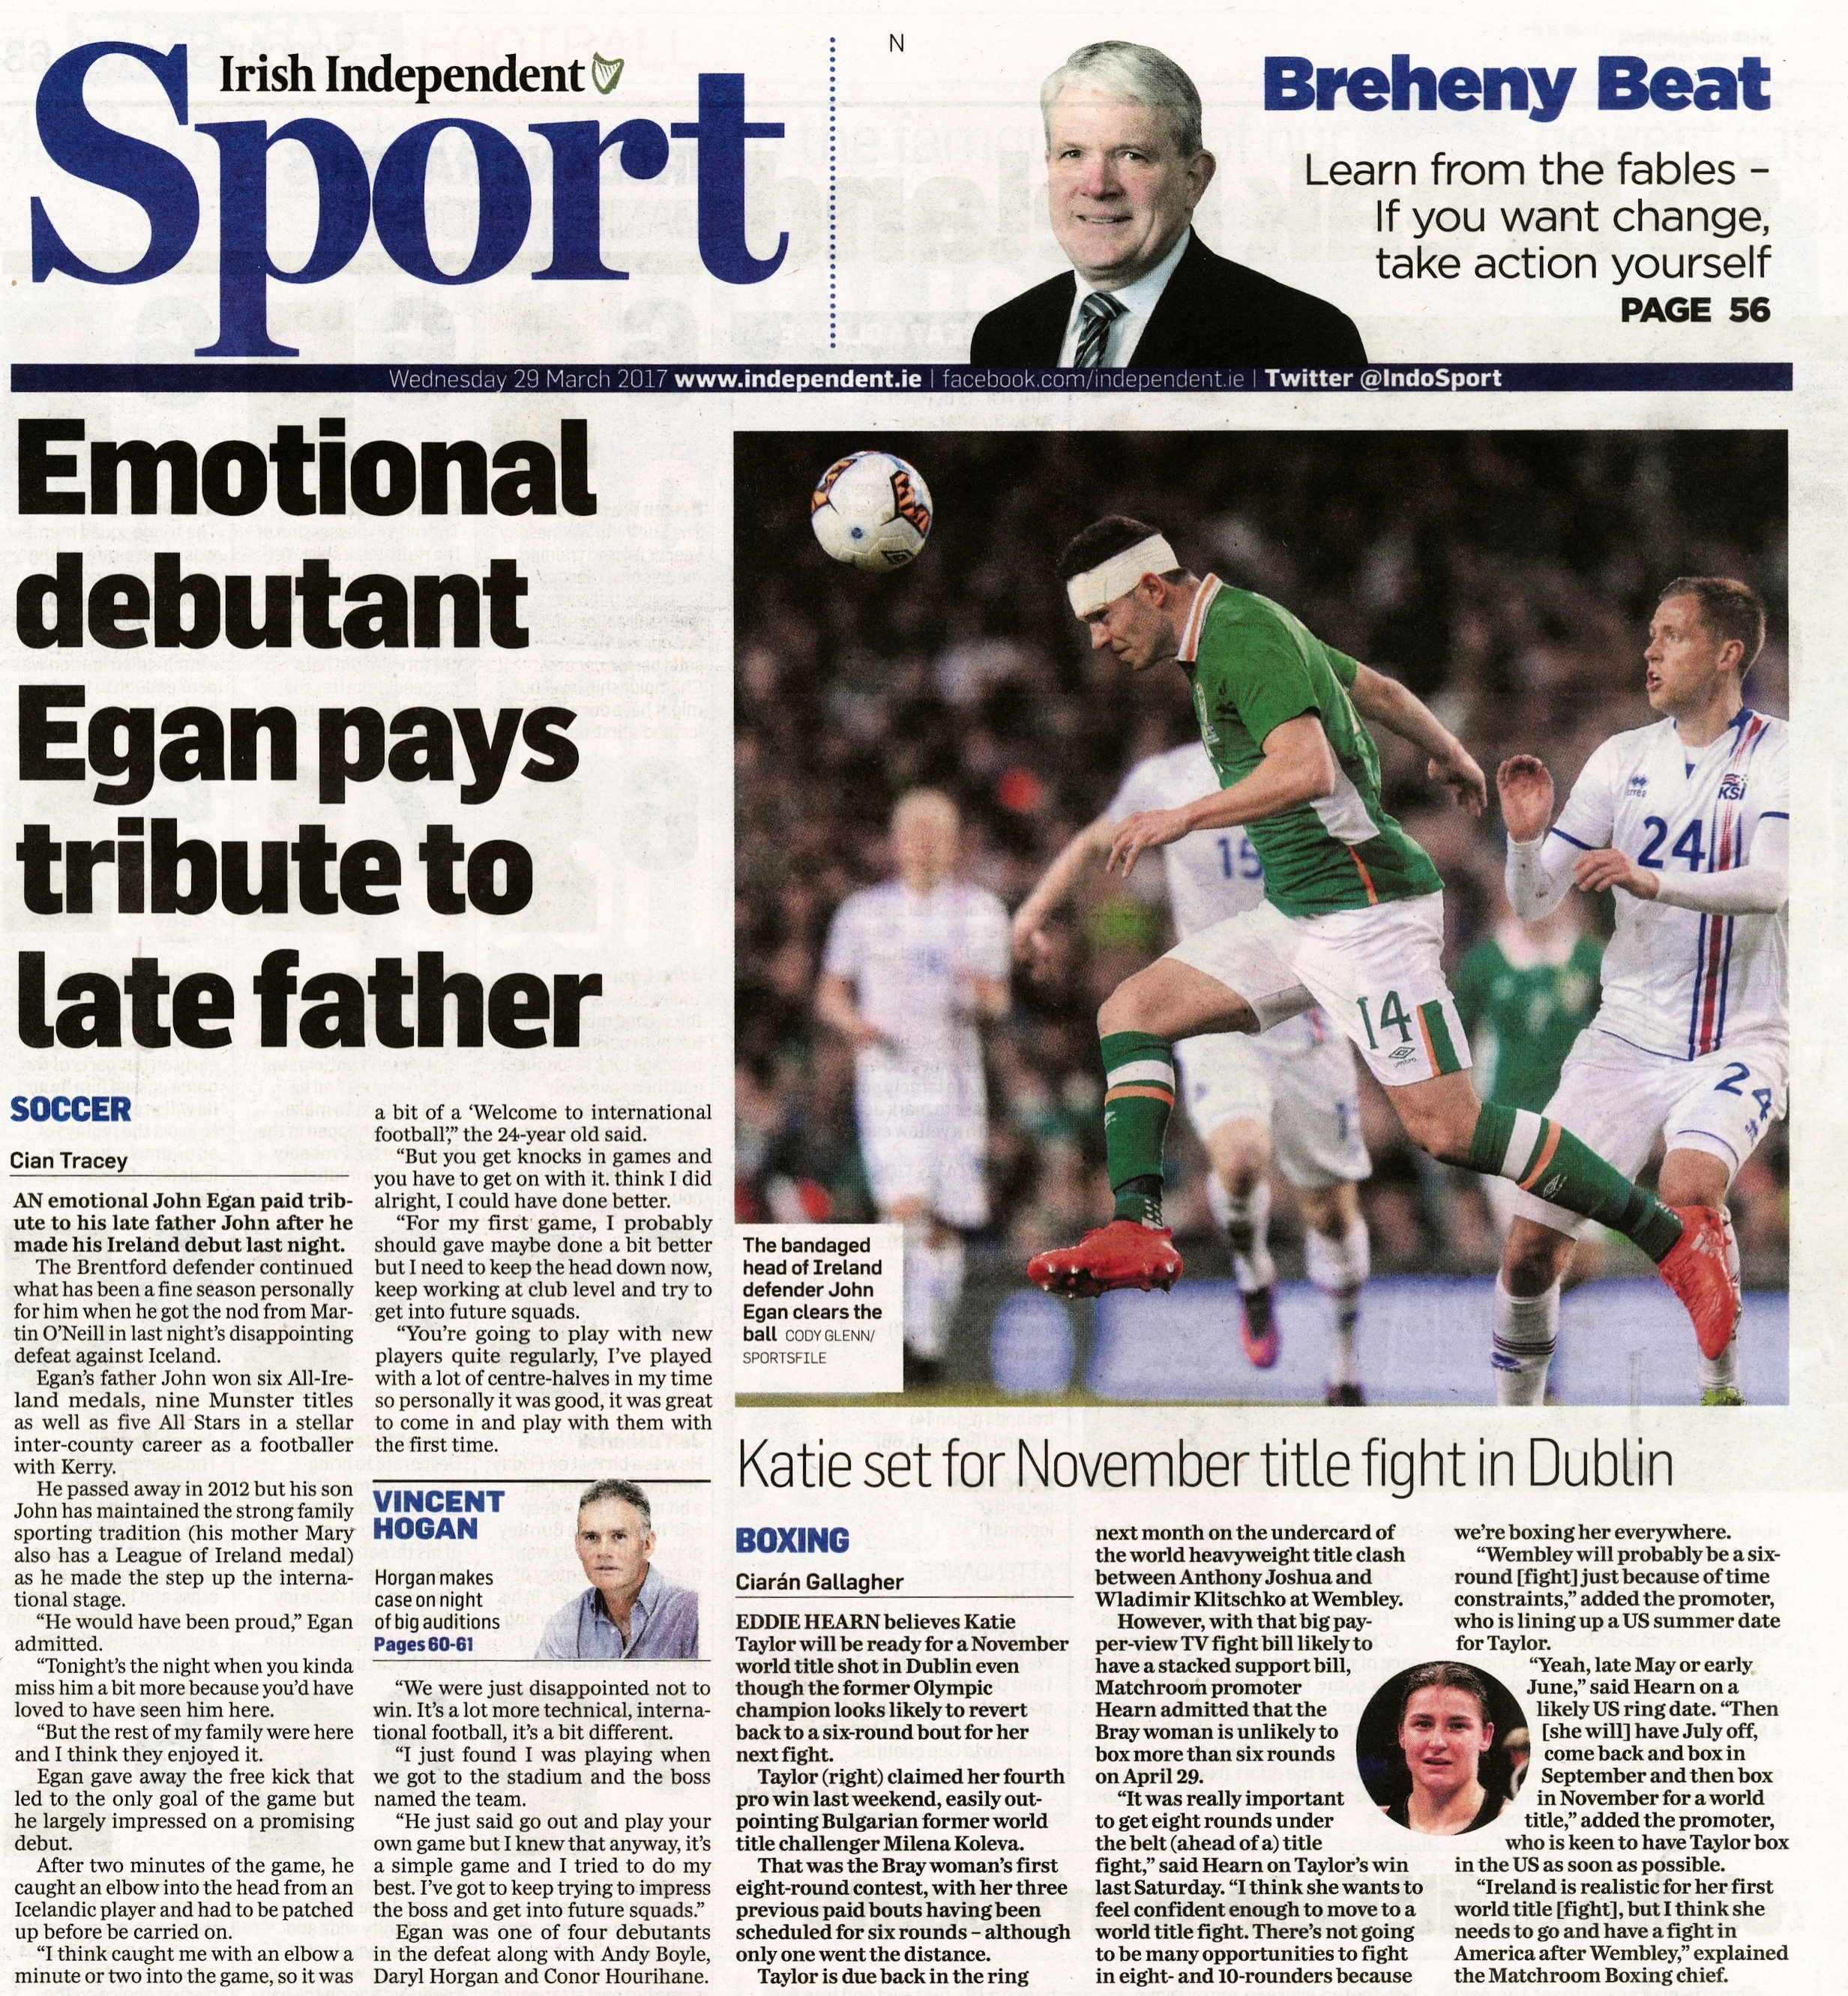  Republic of Ireland defender John Egan sees his first action for the national team against Iceland. March 29 2017  Irish Independent  